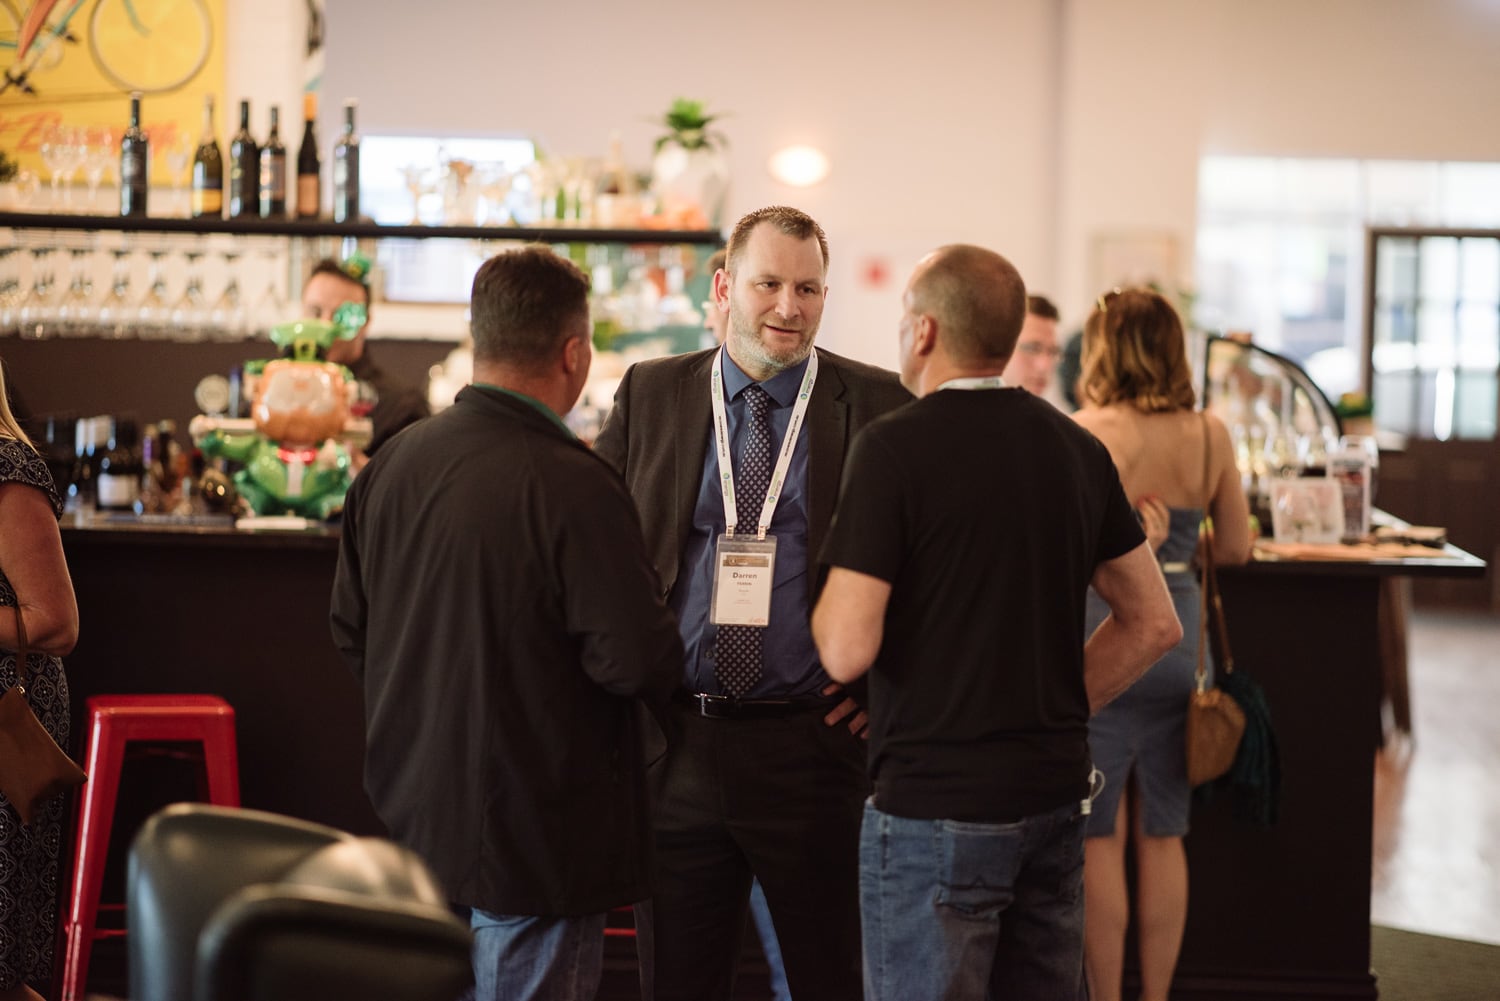 Welcome drinks at the AIEN conference 2019 in Ballarat